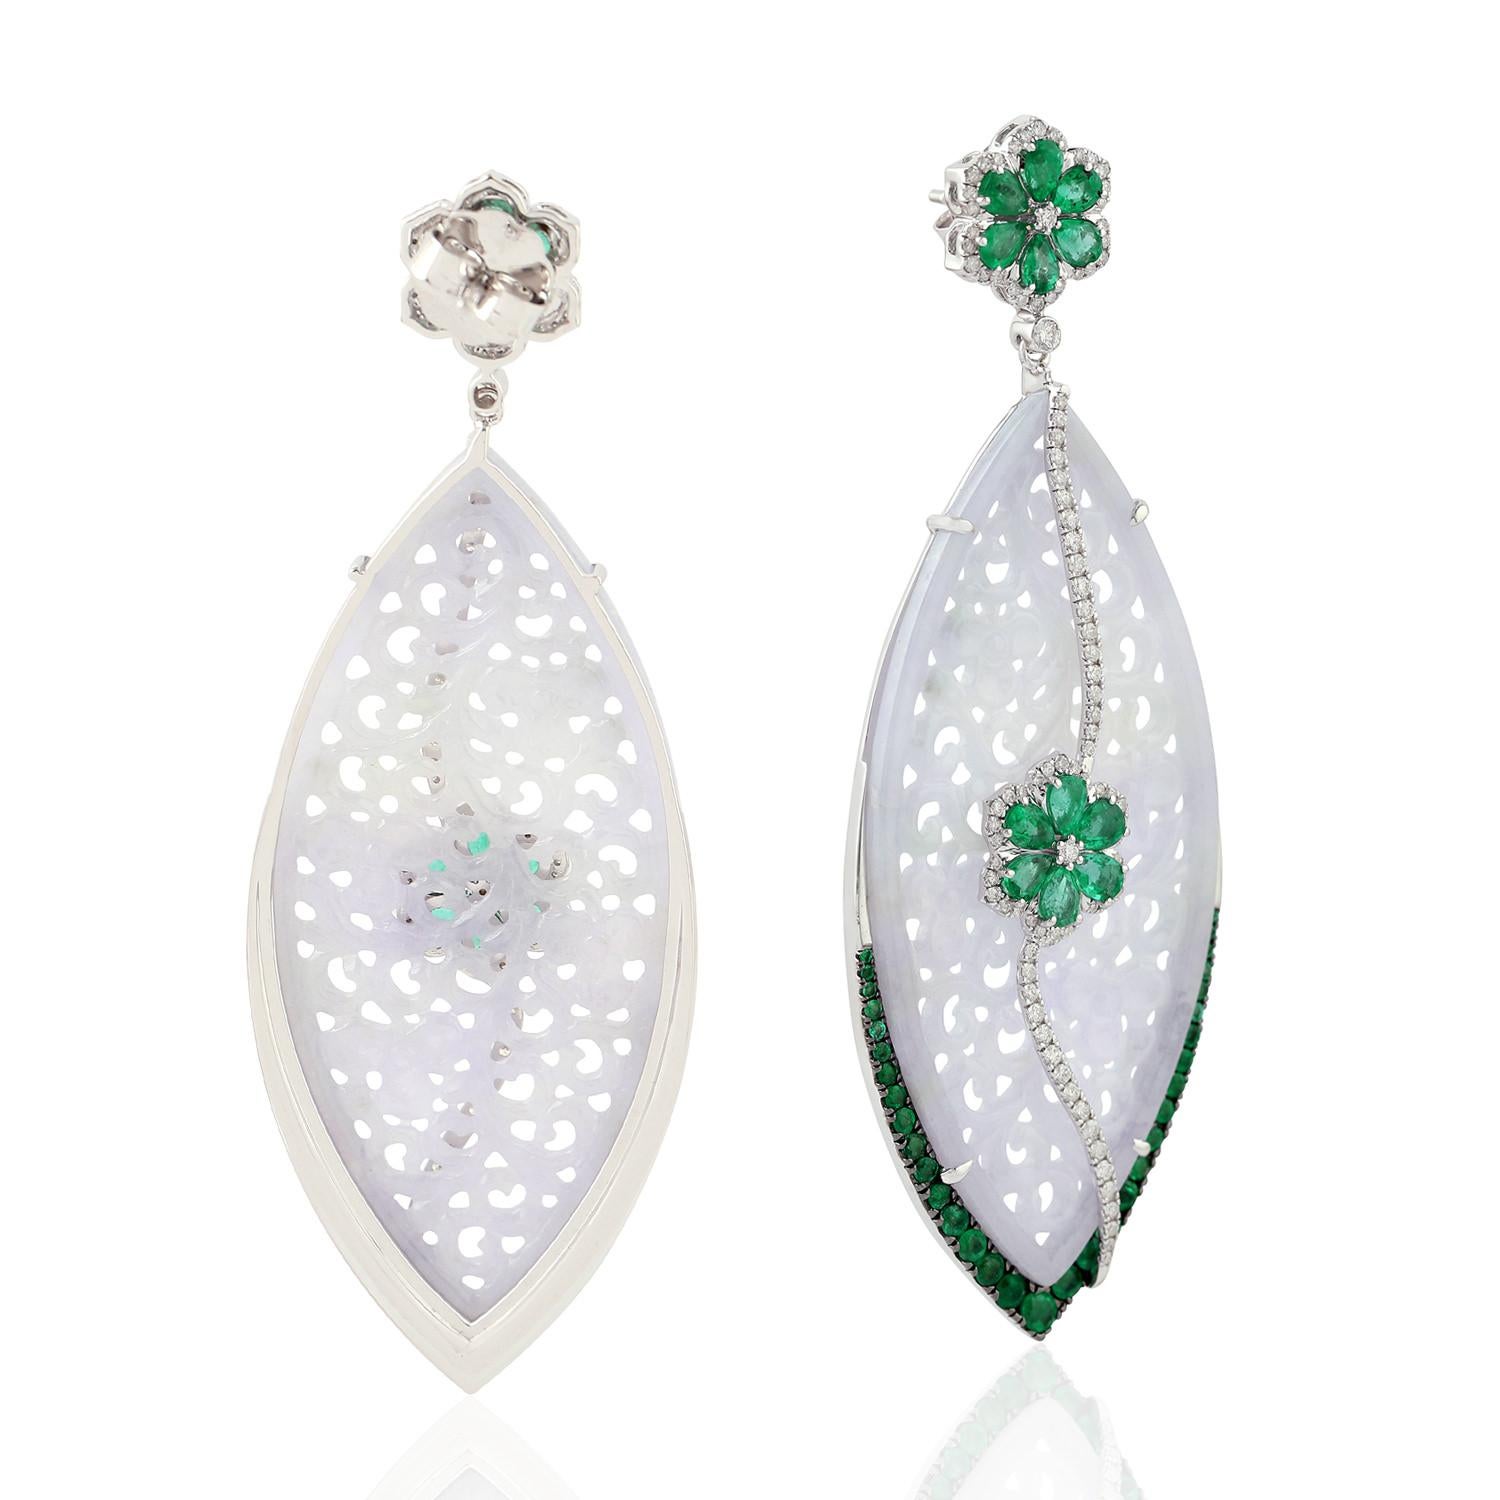 Stunning this White hand carved Jade with emerald and diamonds in 18K White gold is perfect for gifting and can be worn for any occasion.

Closure: Push Post

18KT:19.793gms
Diamond: 1.35ct
EMERALD: 5.84cts
JADE: 49.14cts

